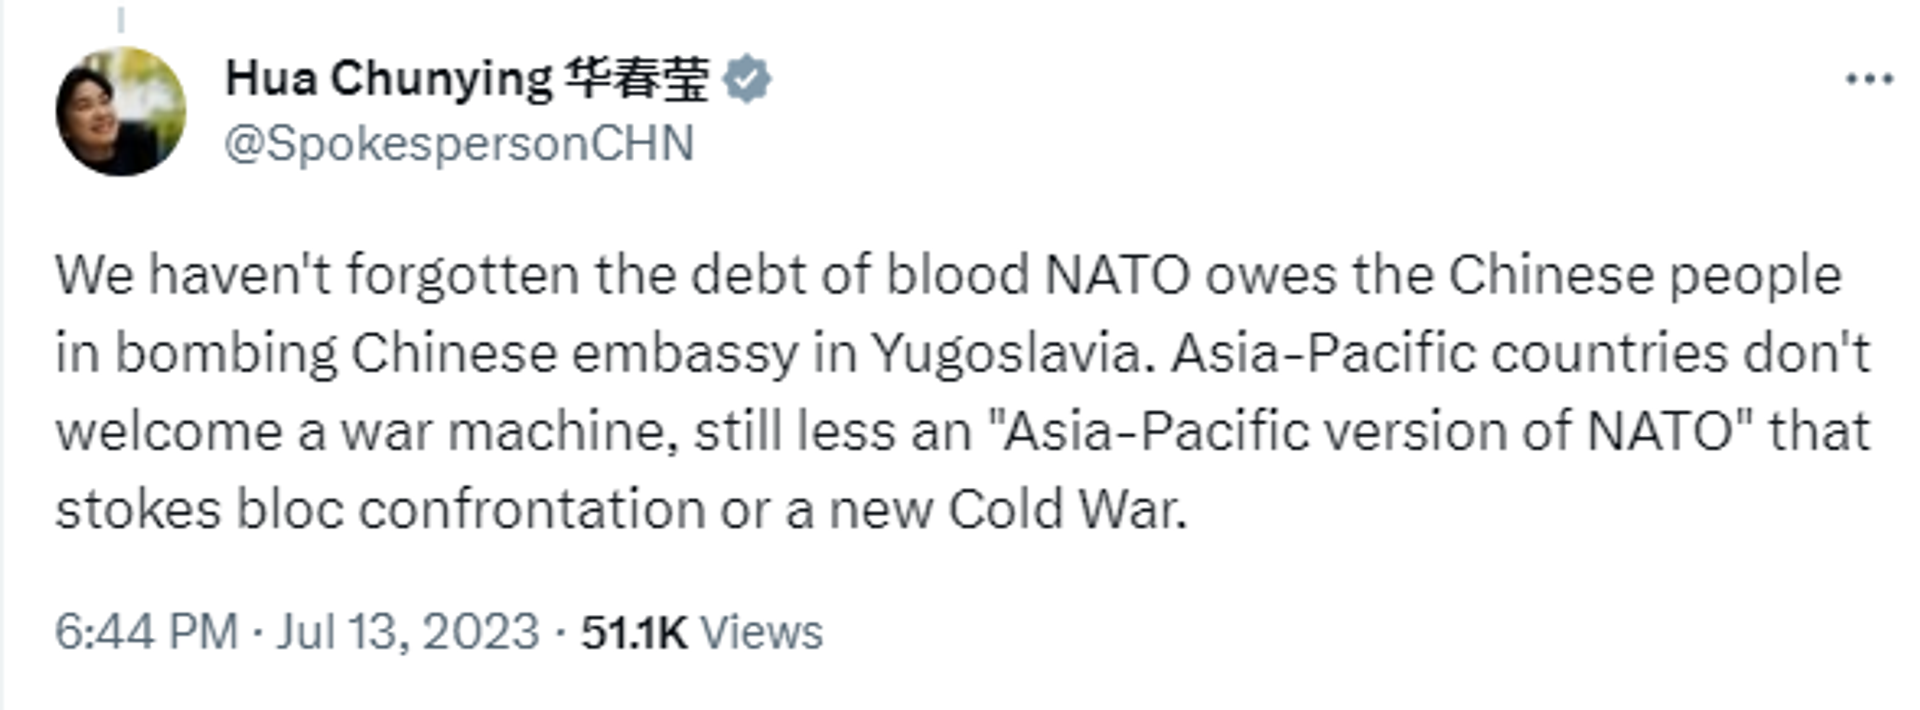 Screengrab of Twitter post by Chinese Foreign Ministry Spokesperson Hua Chunying. - Sputnik International, 1920, 15.07.2023